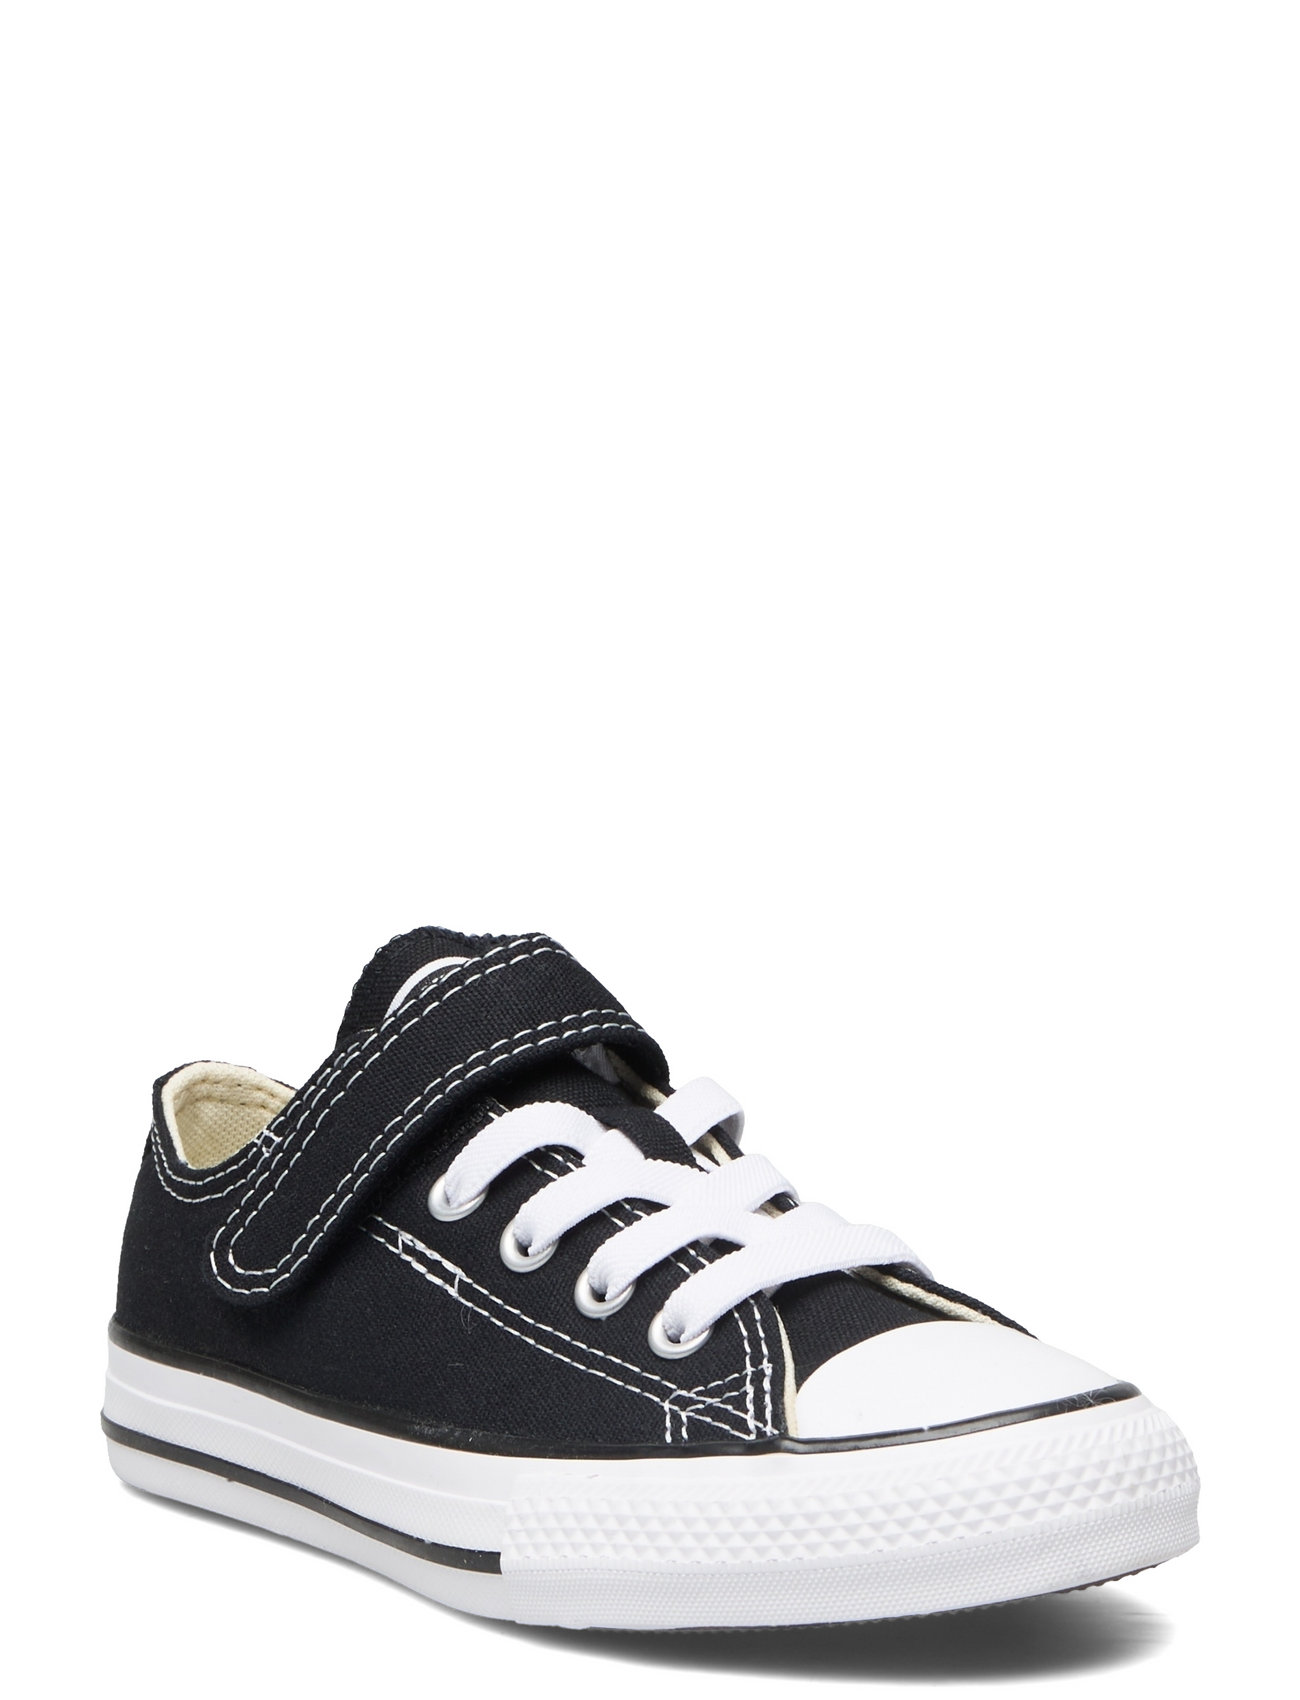 Ctas 1V Ox Black/Natural/White Sport Sneakers Low-top Sneakers Black Converse